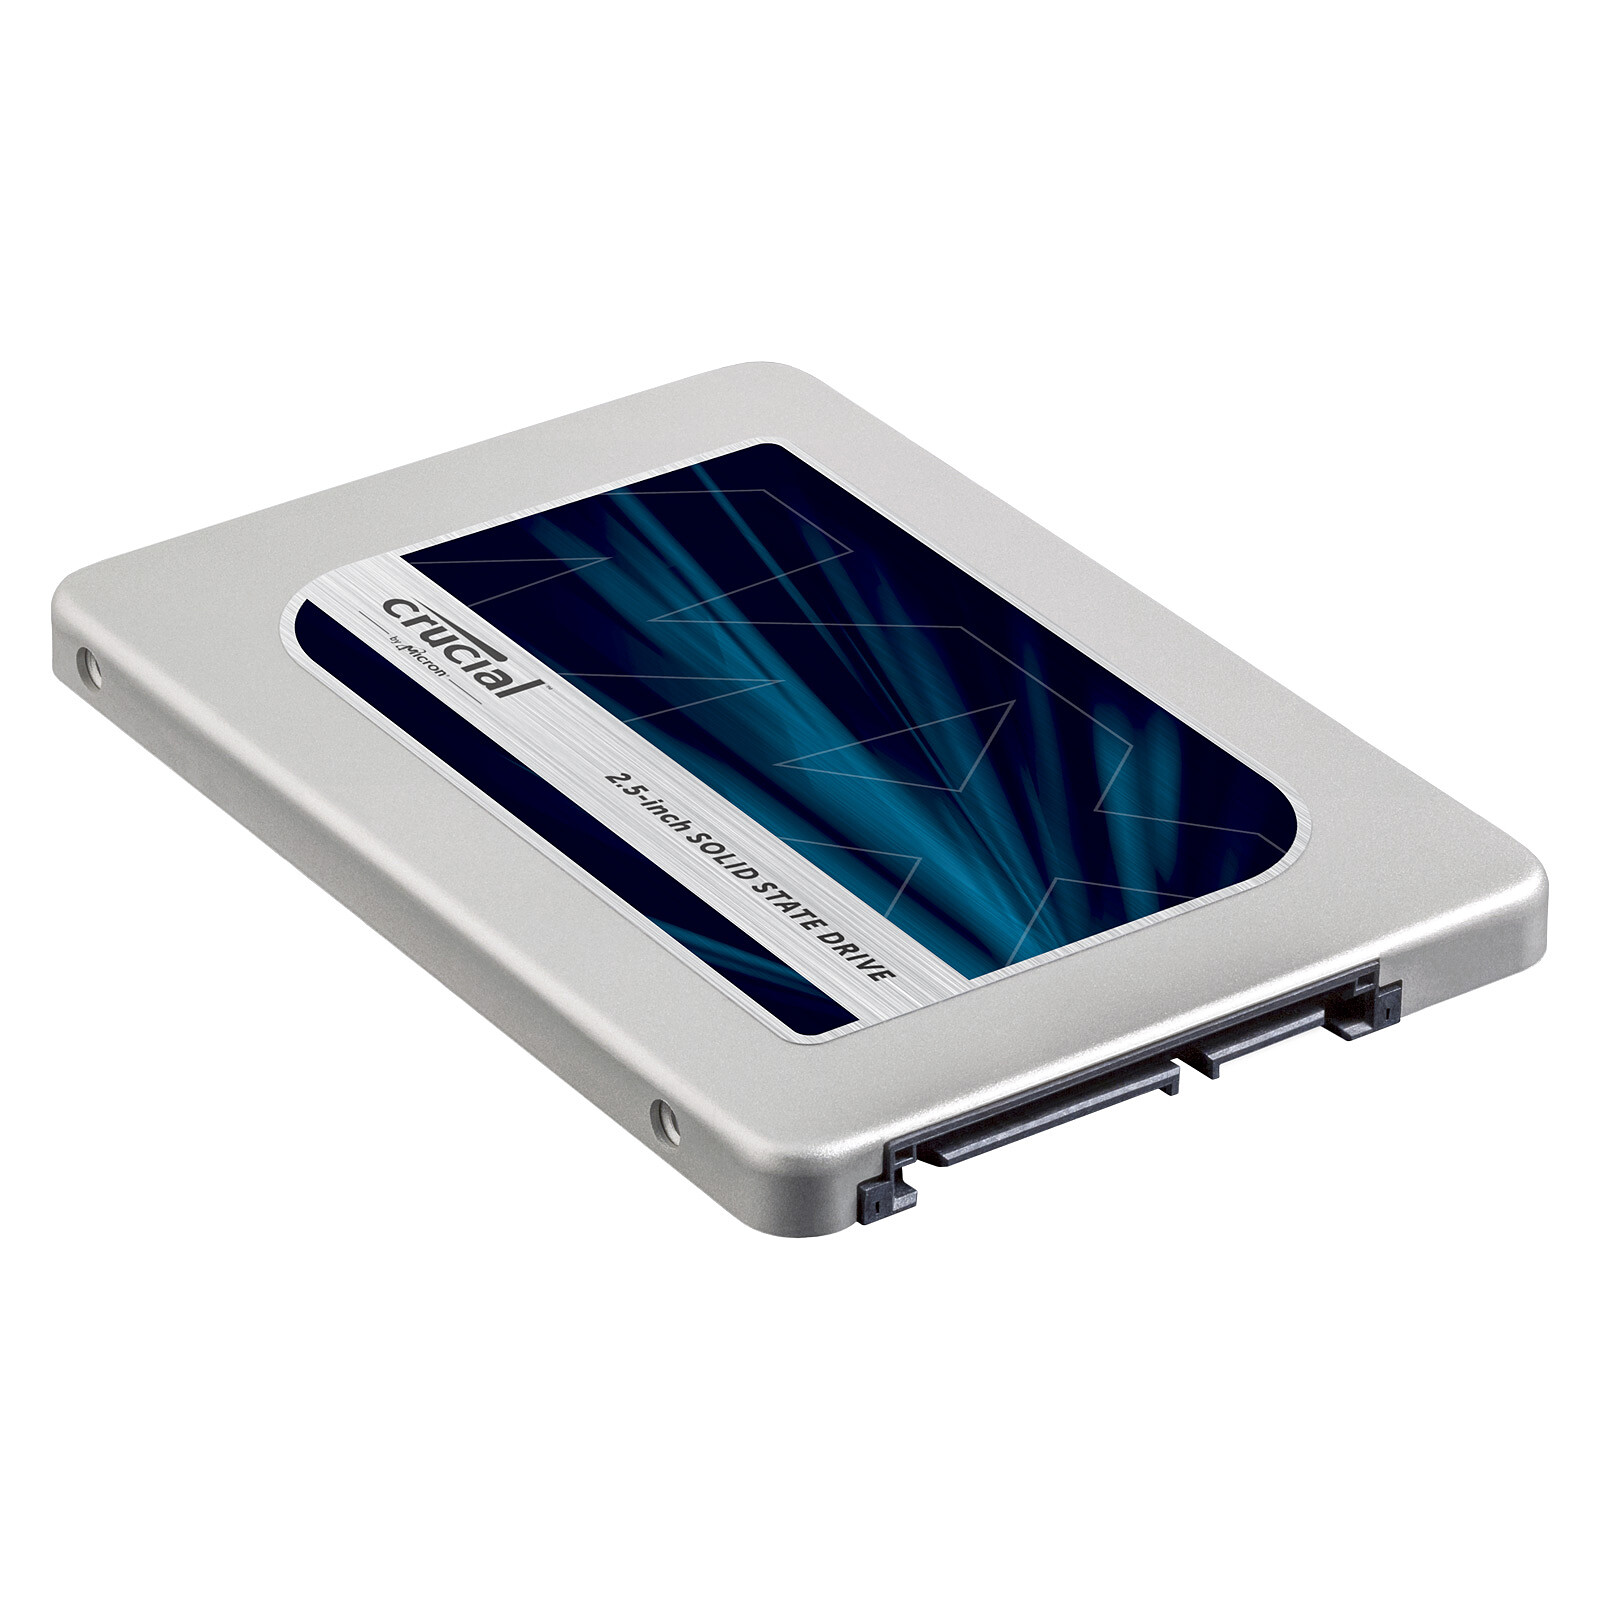 Disques SSD (Solid State Drives) - 500 Go, 1 To, 2 To et plus